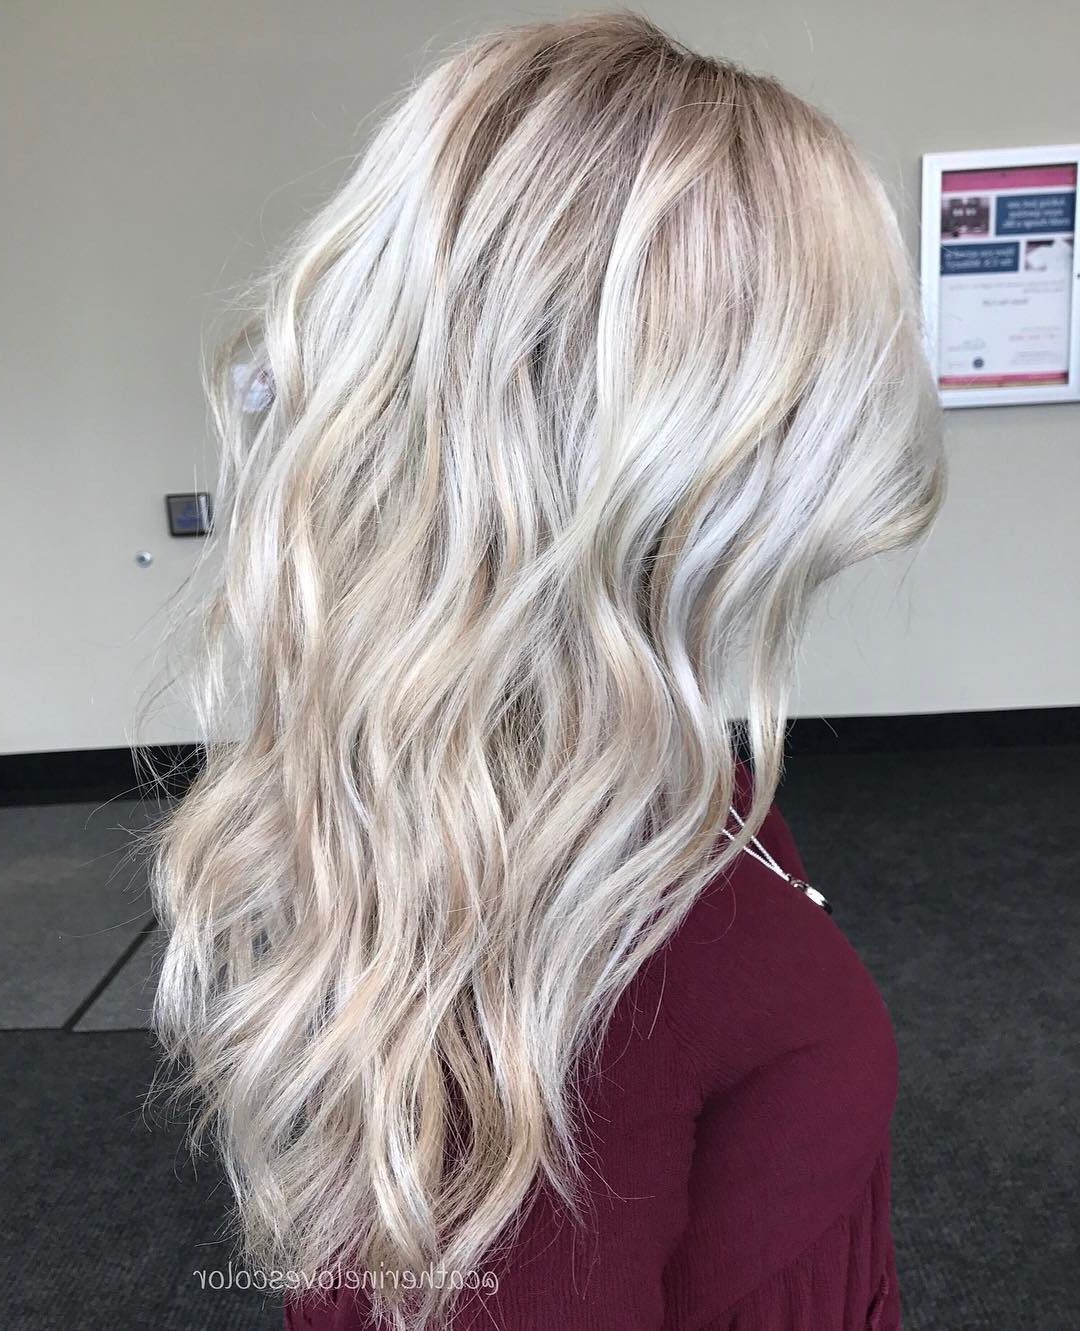 20 Adorable Ash Blonde Hairstyles To Try: Hair Color Ideas 2018 In White Blonde Curly Layered Bob Hairstyles (Gallery 20 of 20)